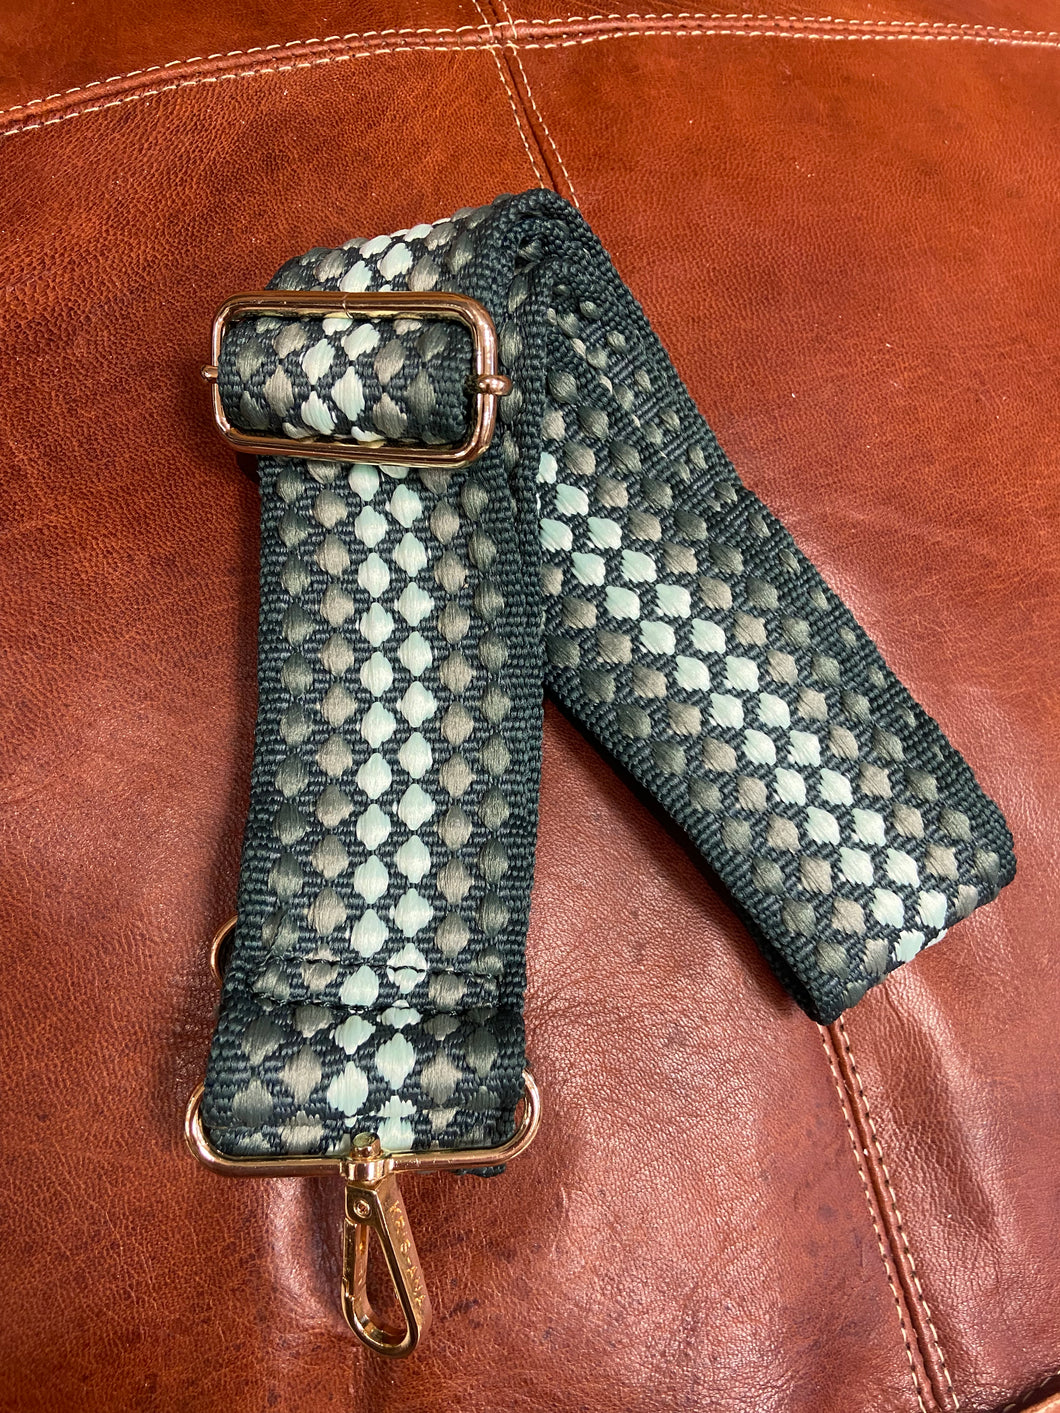 A bag strap which can be added to your bag of choice to personalise your look. Green, with various shades, and a spot design, it will coordinate with many colours. Fully adjustable, and with gold coloured metal hardware. 